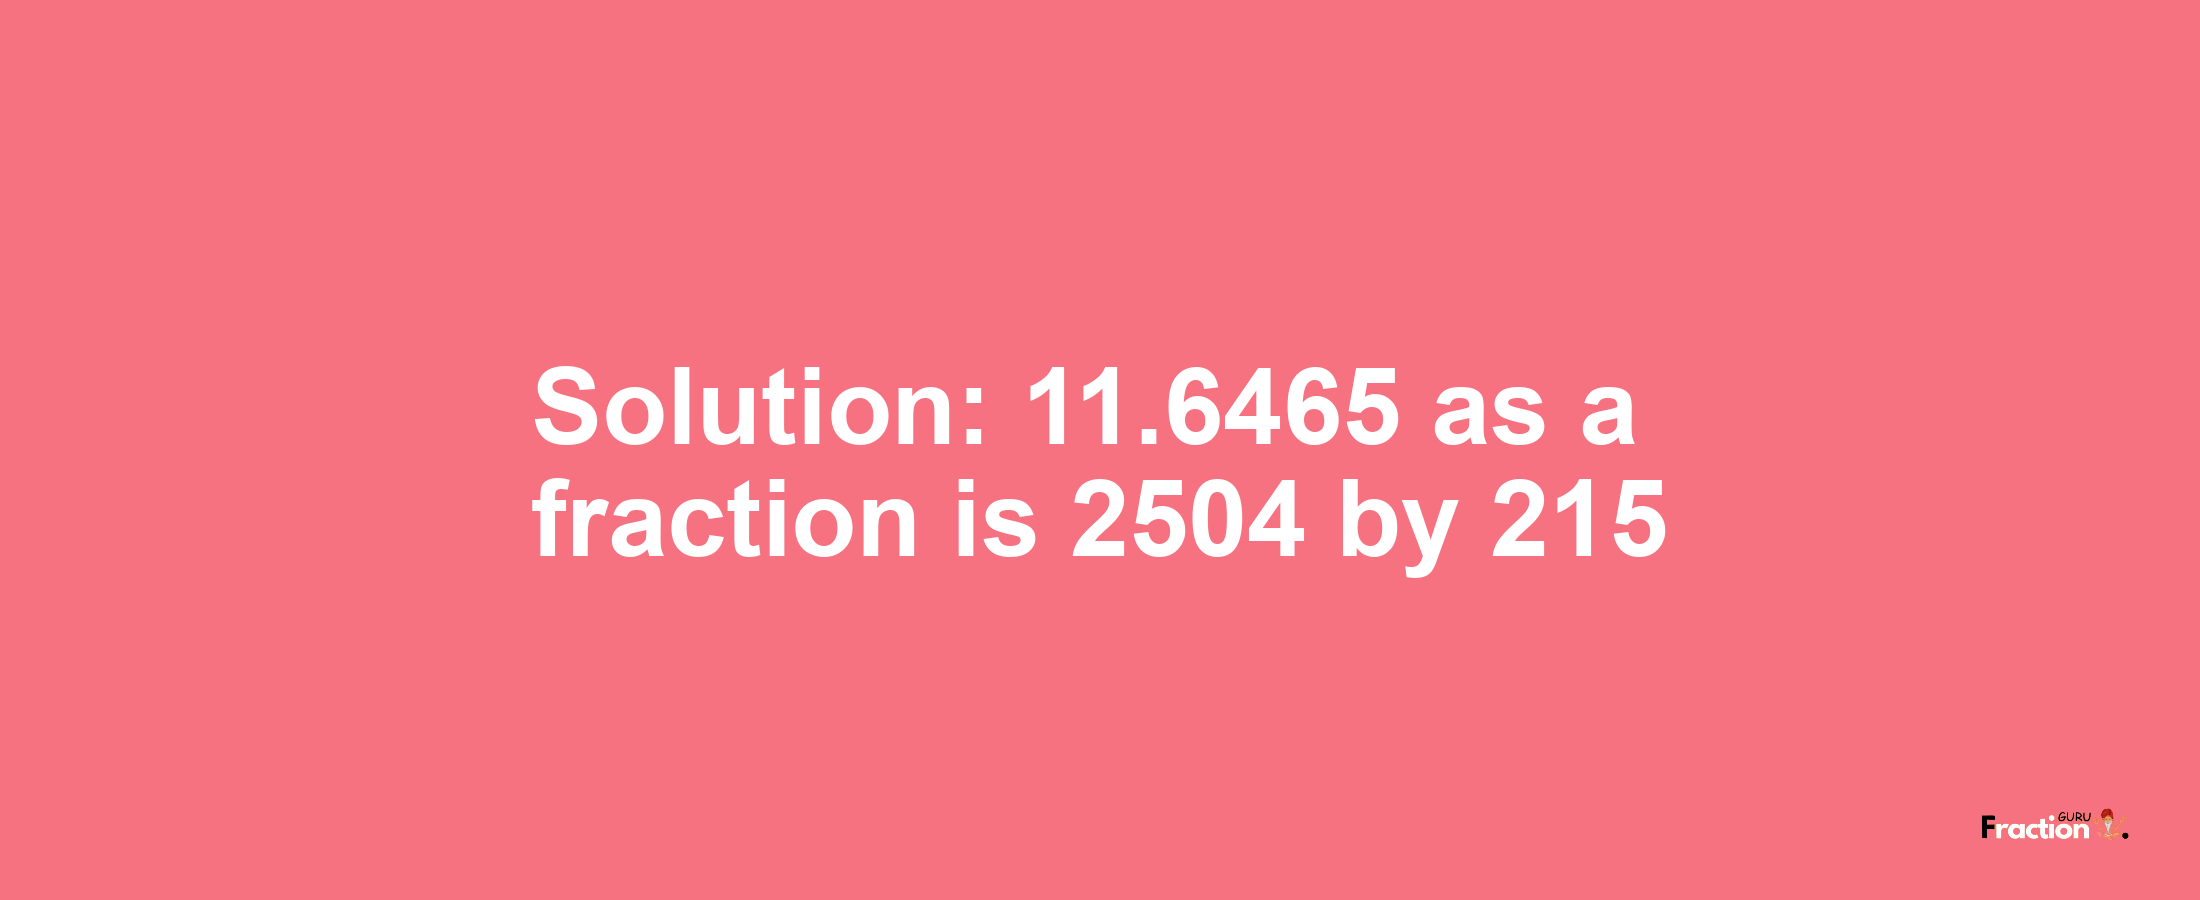 Solution:11.6465 as a fraction is 2504/215